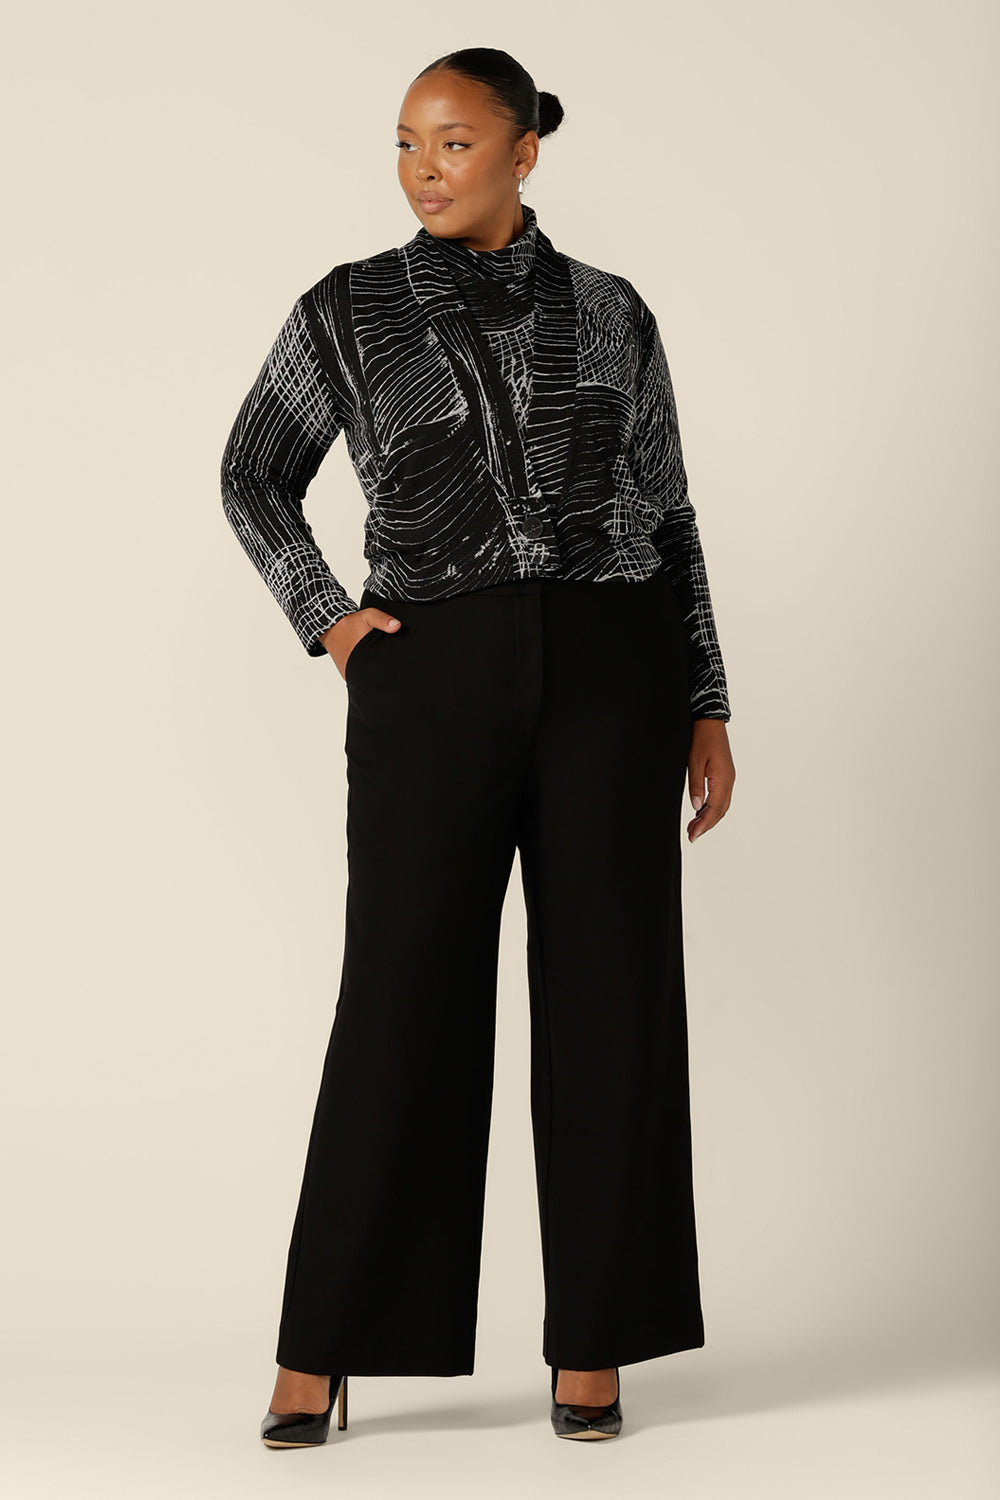 A fuller figure woman wears a long sleeve, woolly knit turtleneck top, size 18, in an abstract black and white pattern. A warm winter top, this women's polo neck top by Australian and New Zealand women's clothing label, L&F is worn with high-waisted, wide leg black pants and woolly knit cardigan.